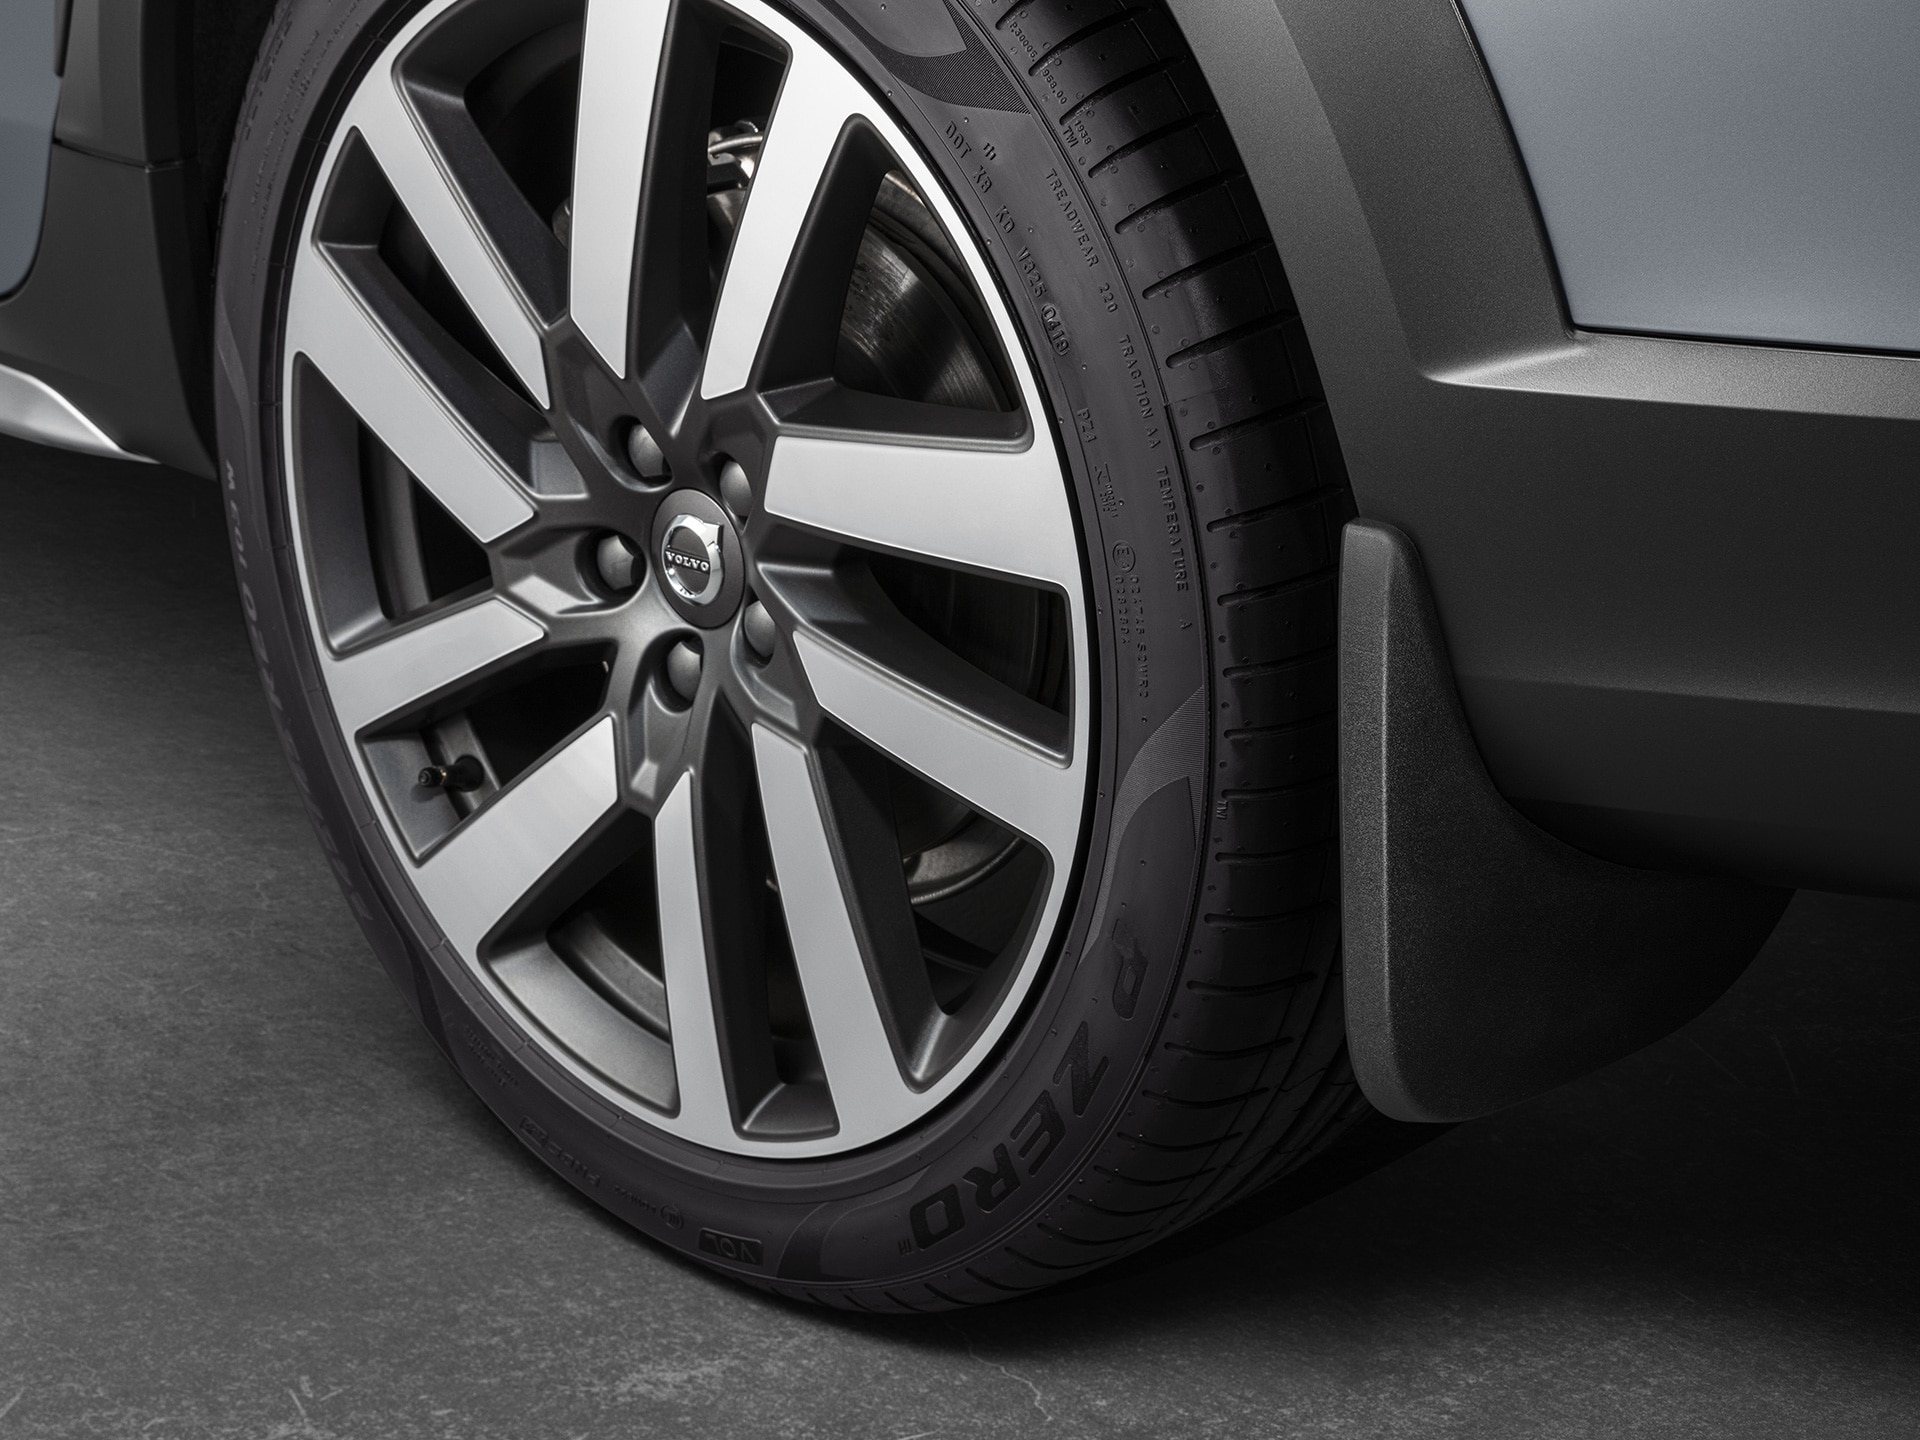 Extra stability and grip with large wheels on the Volvo V90 Cross Country.